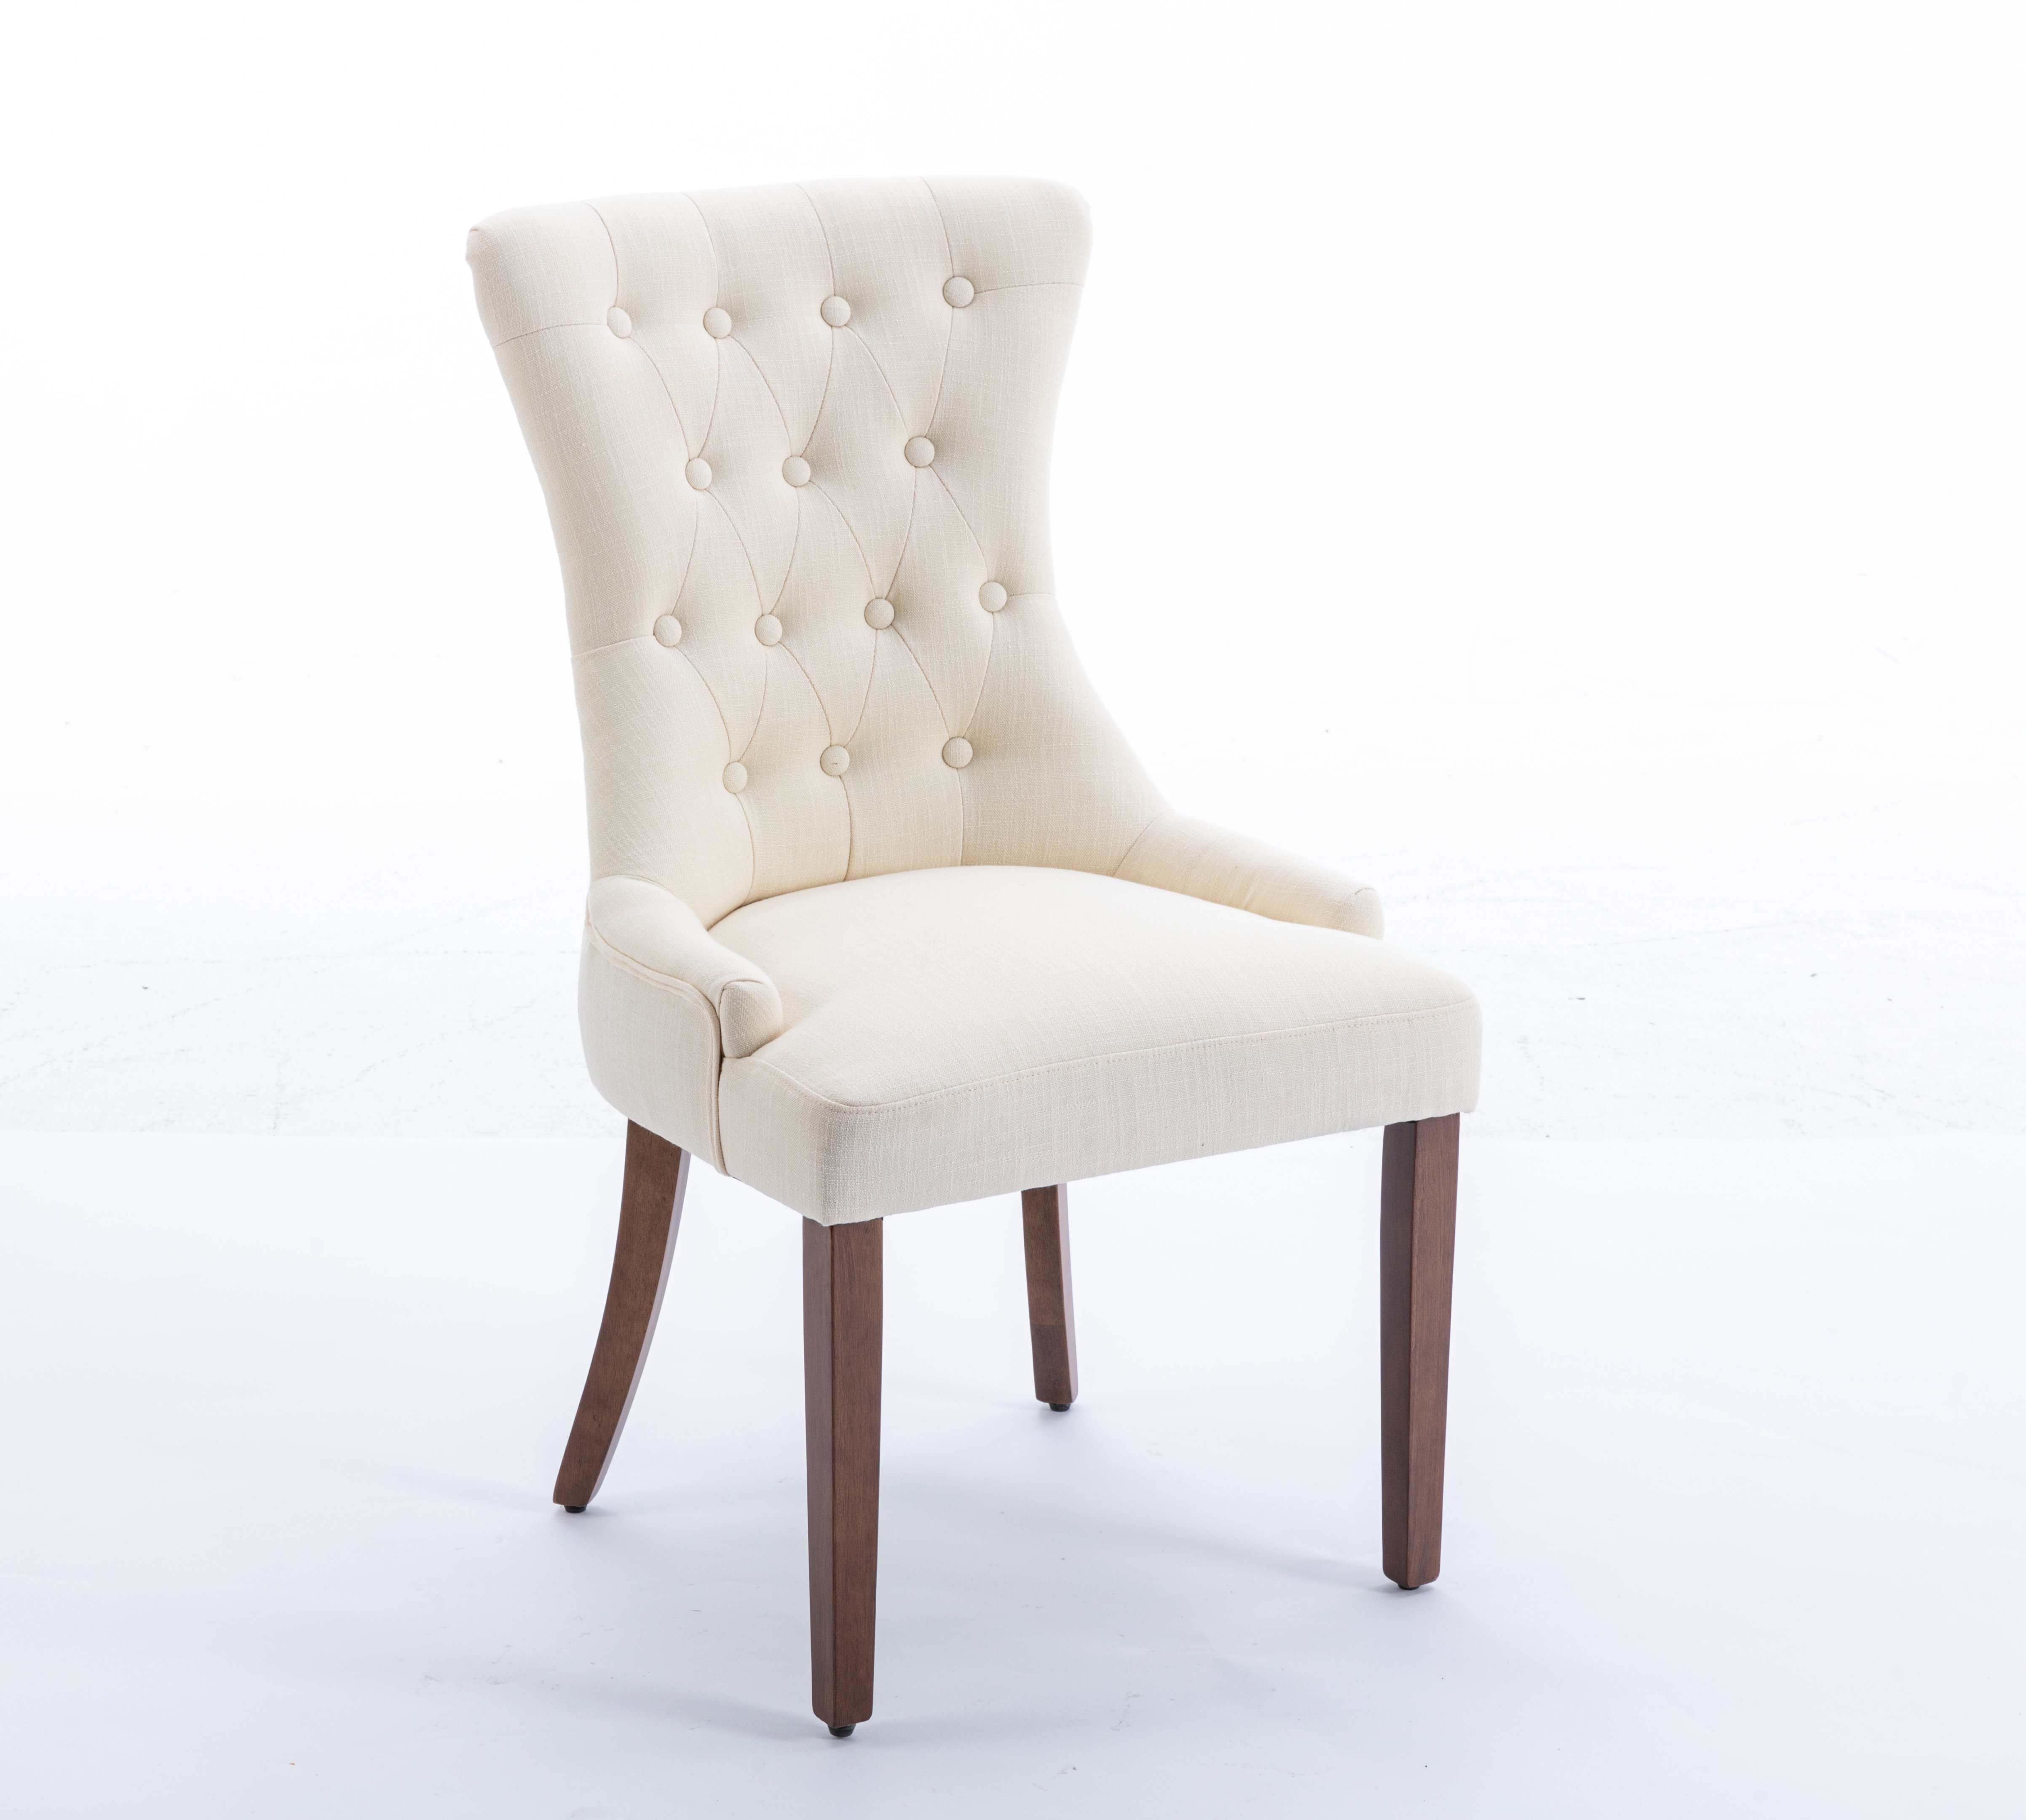 Classic Tufted Beige Linen Upholstered Dining Chair with Solid Wood Legs 2 PCS-CASAINC